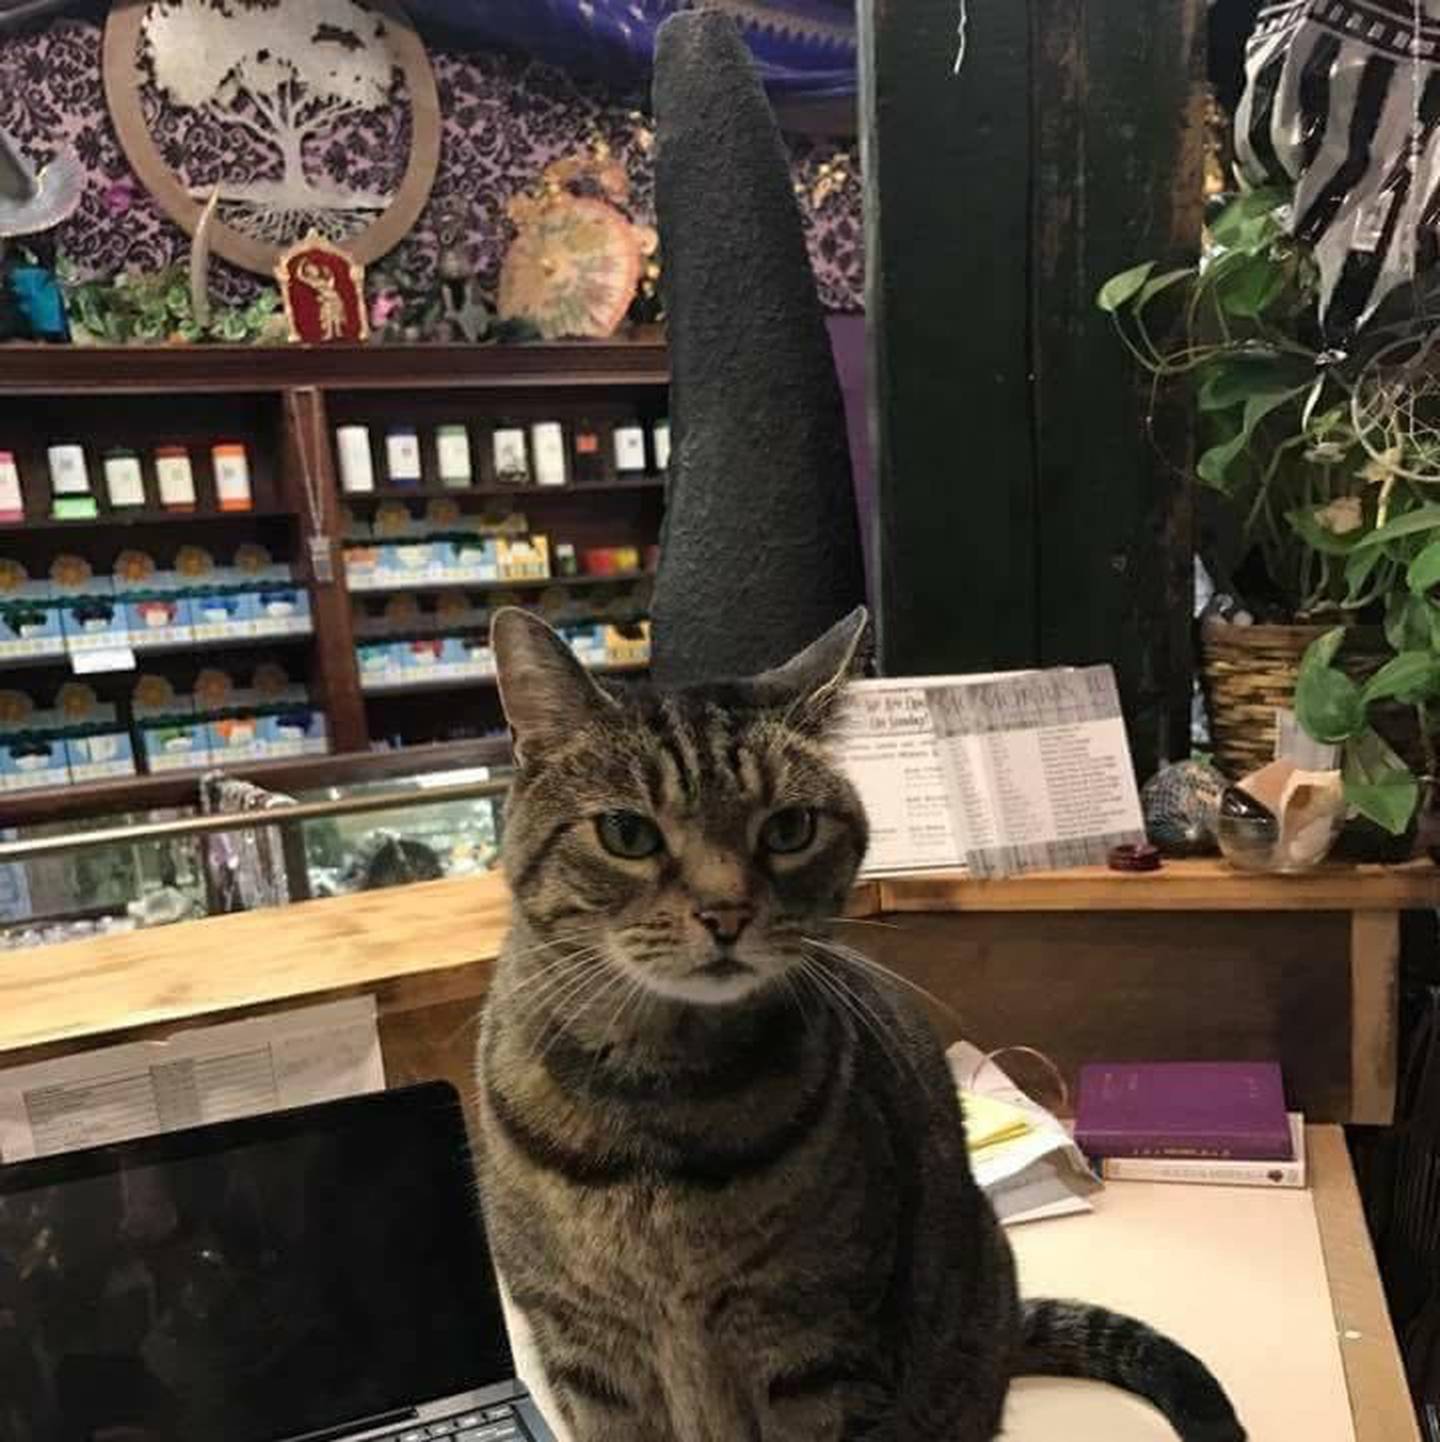 Customers of Rock Soul Love in Morris knew "Franny," the tabby who wandered into the shop one day and made it her home for several years.